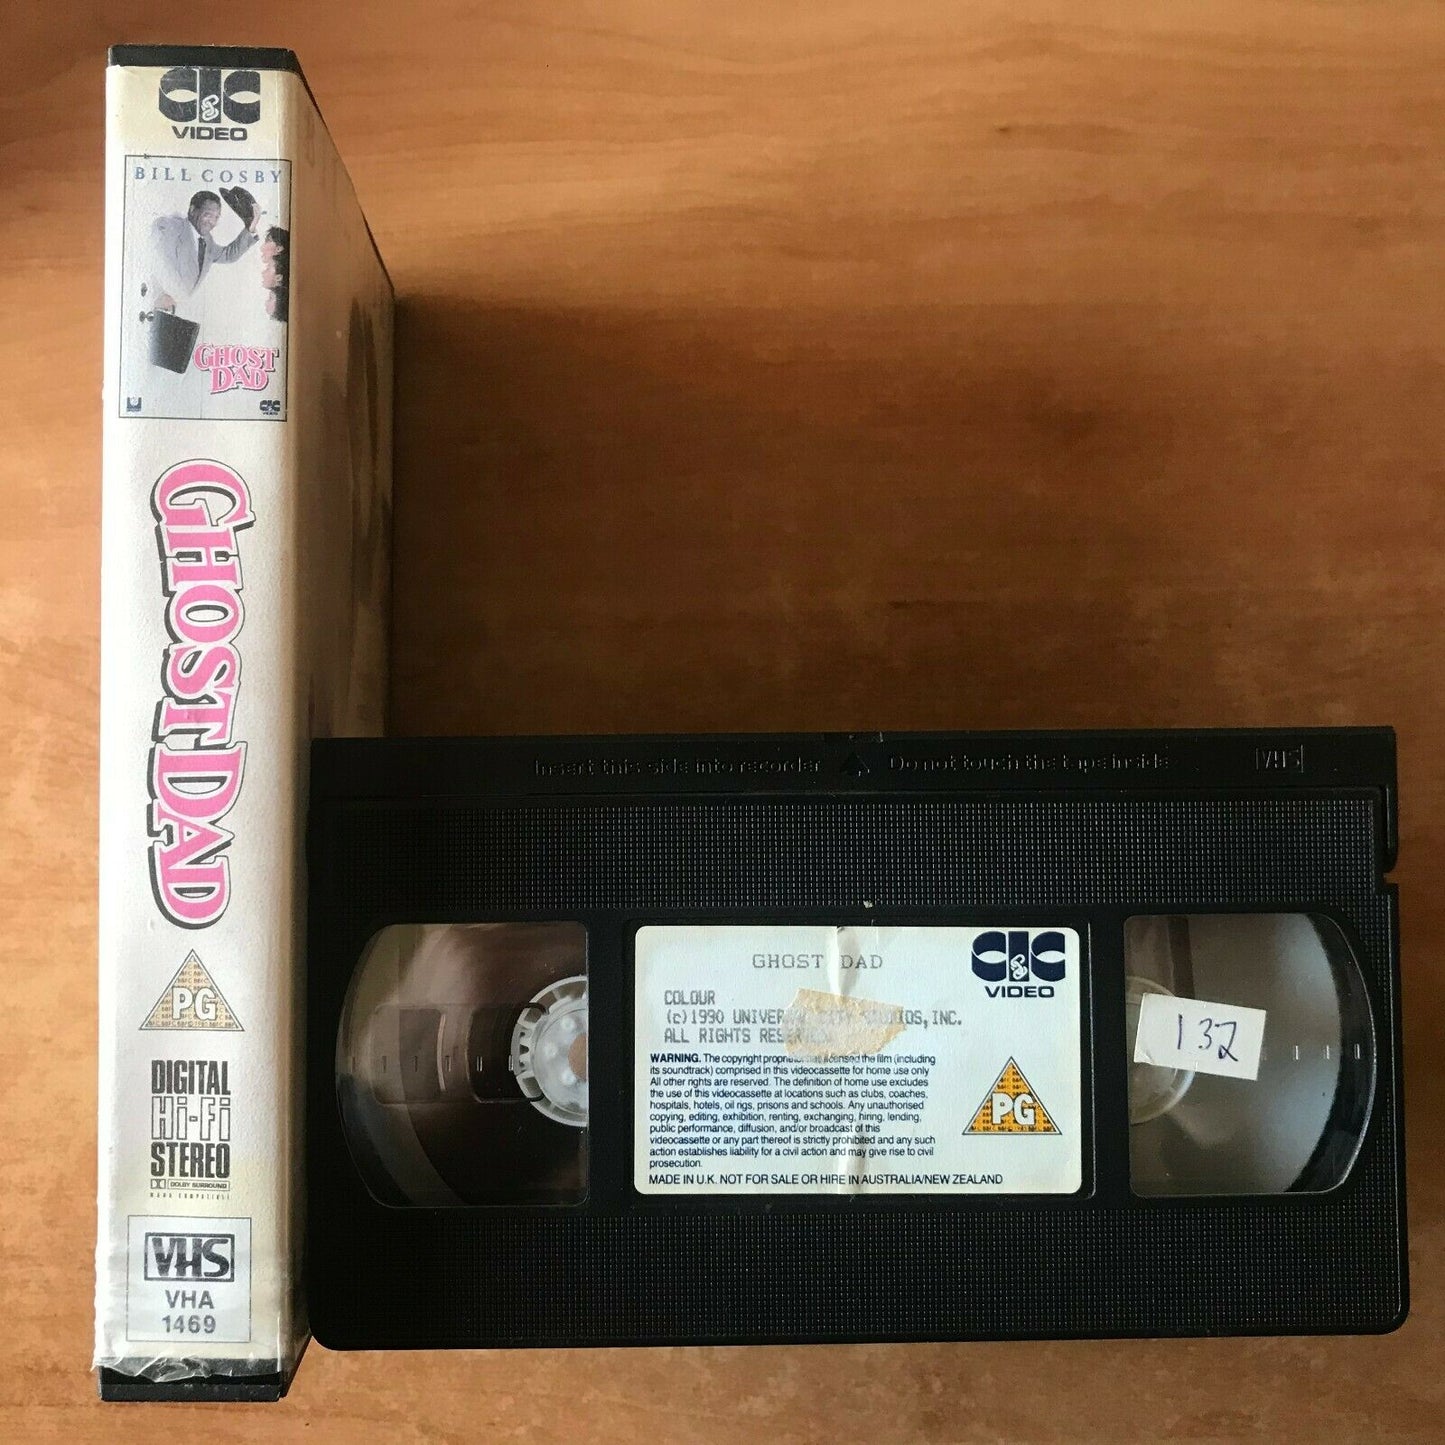 Ghost Dad (1990): Family Movie - Bill Cosby - Comedy [Large Box] Rental - VHS-